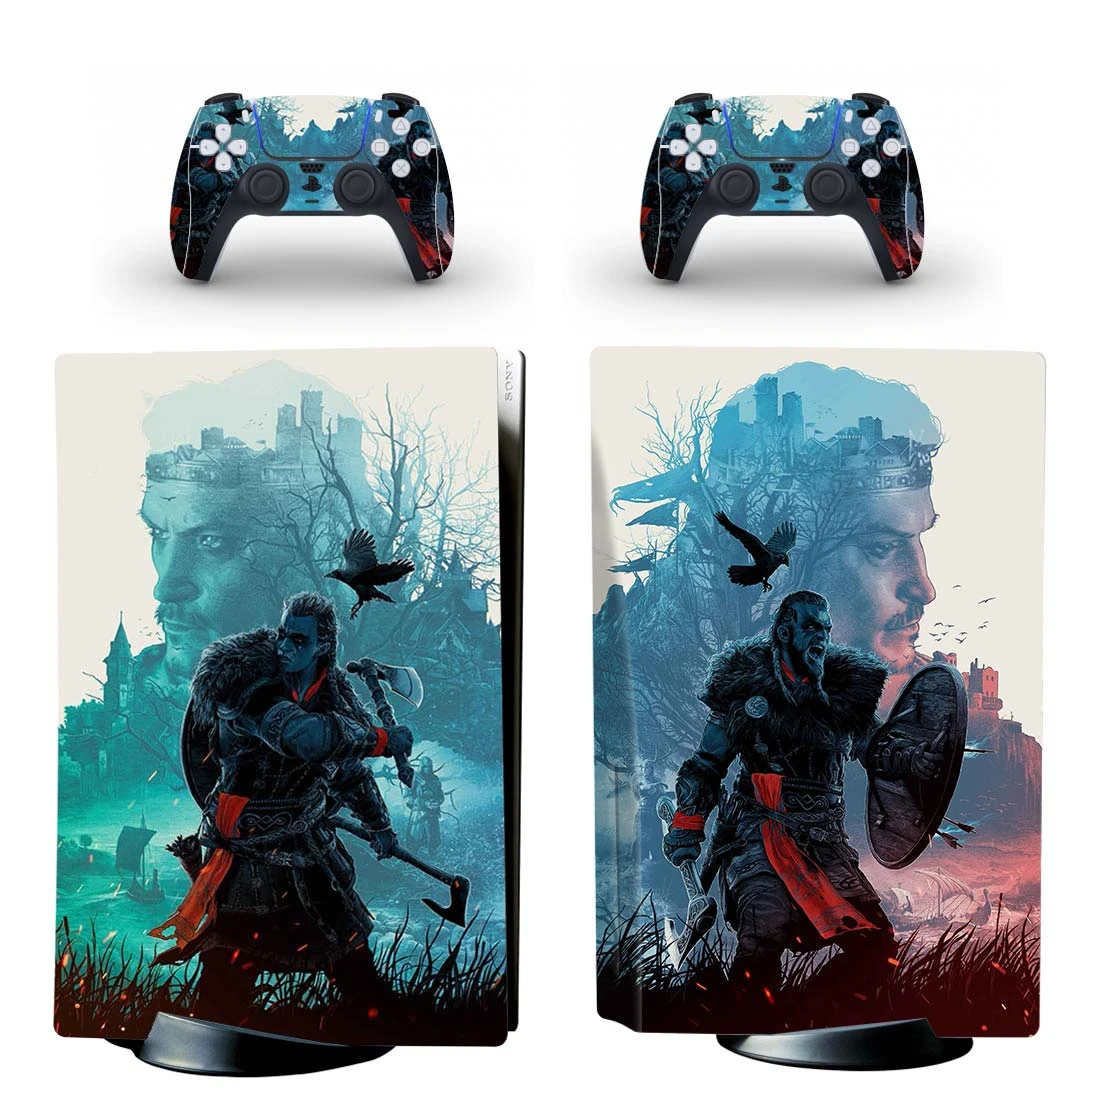 Game Alan Wake 2 PS5 Slim Disc Skin Sticker Decal Cover for Console and 2  Controllers New PS5 Slim Disk Skin Vinyl - AliExpress